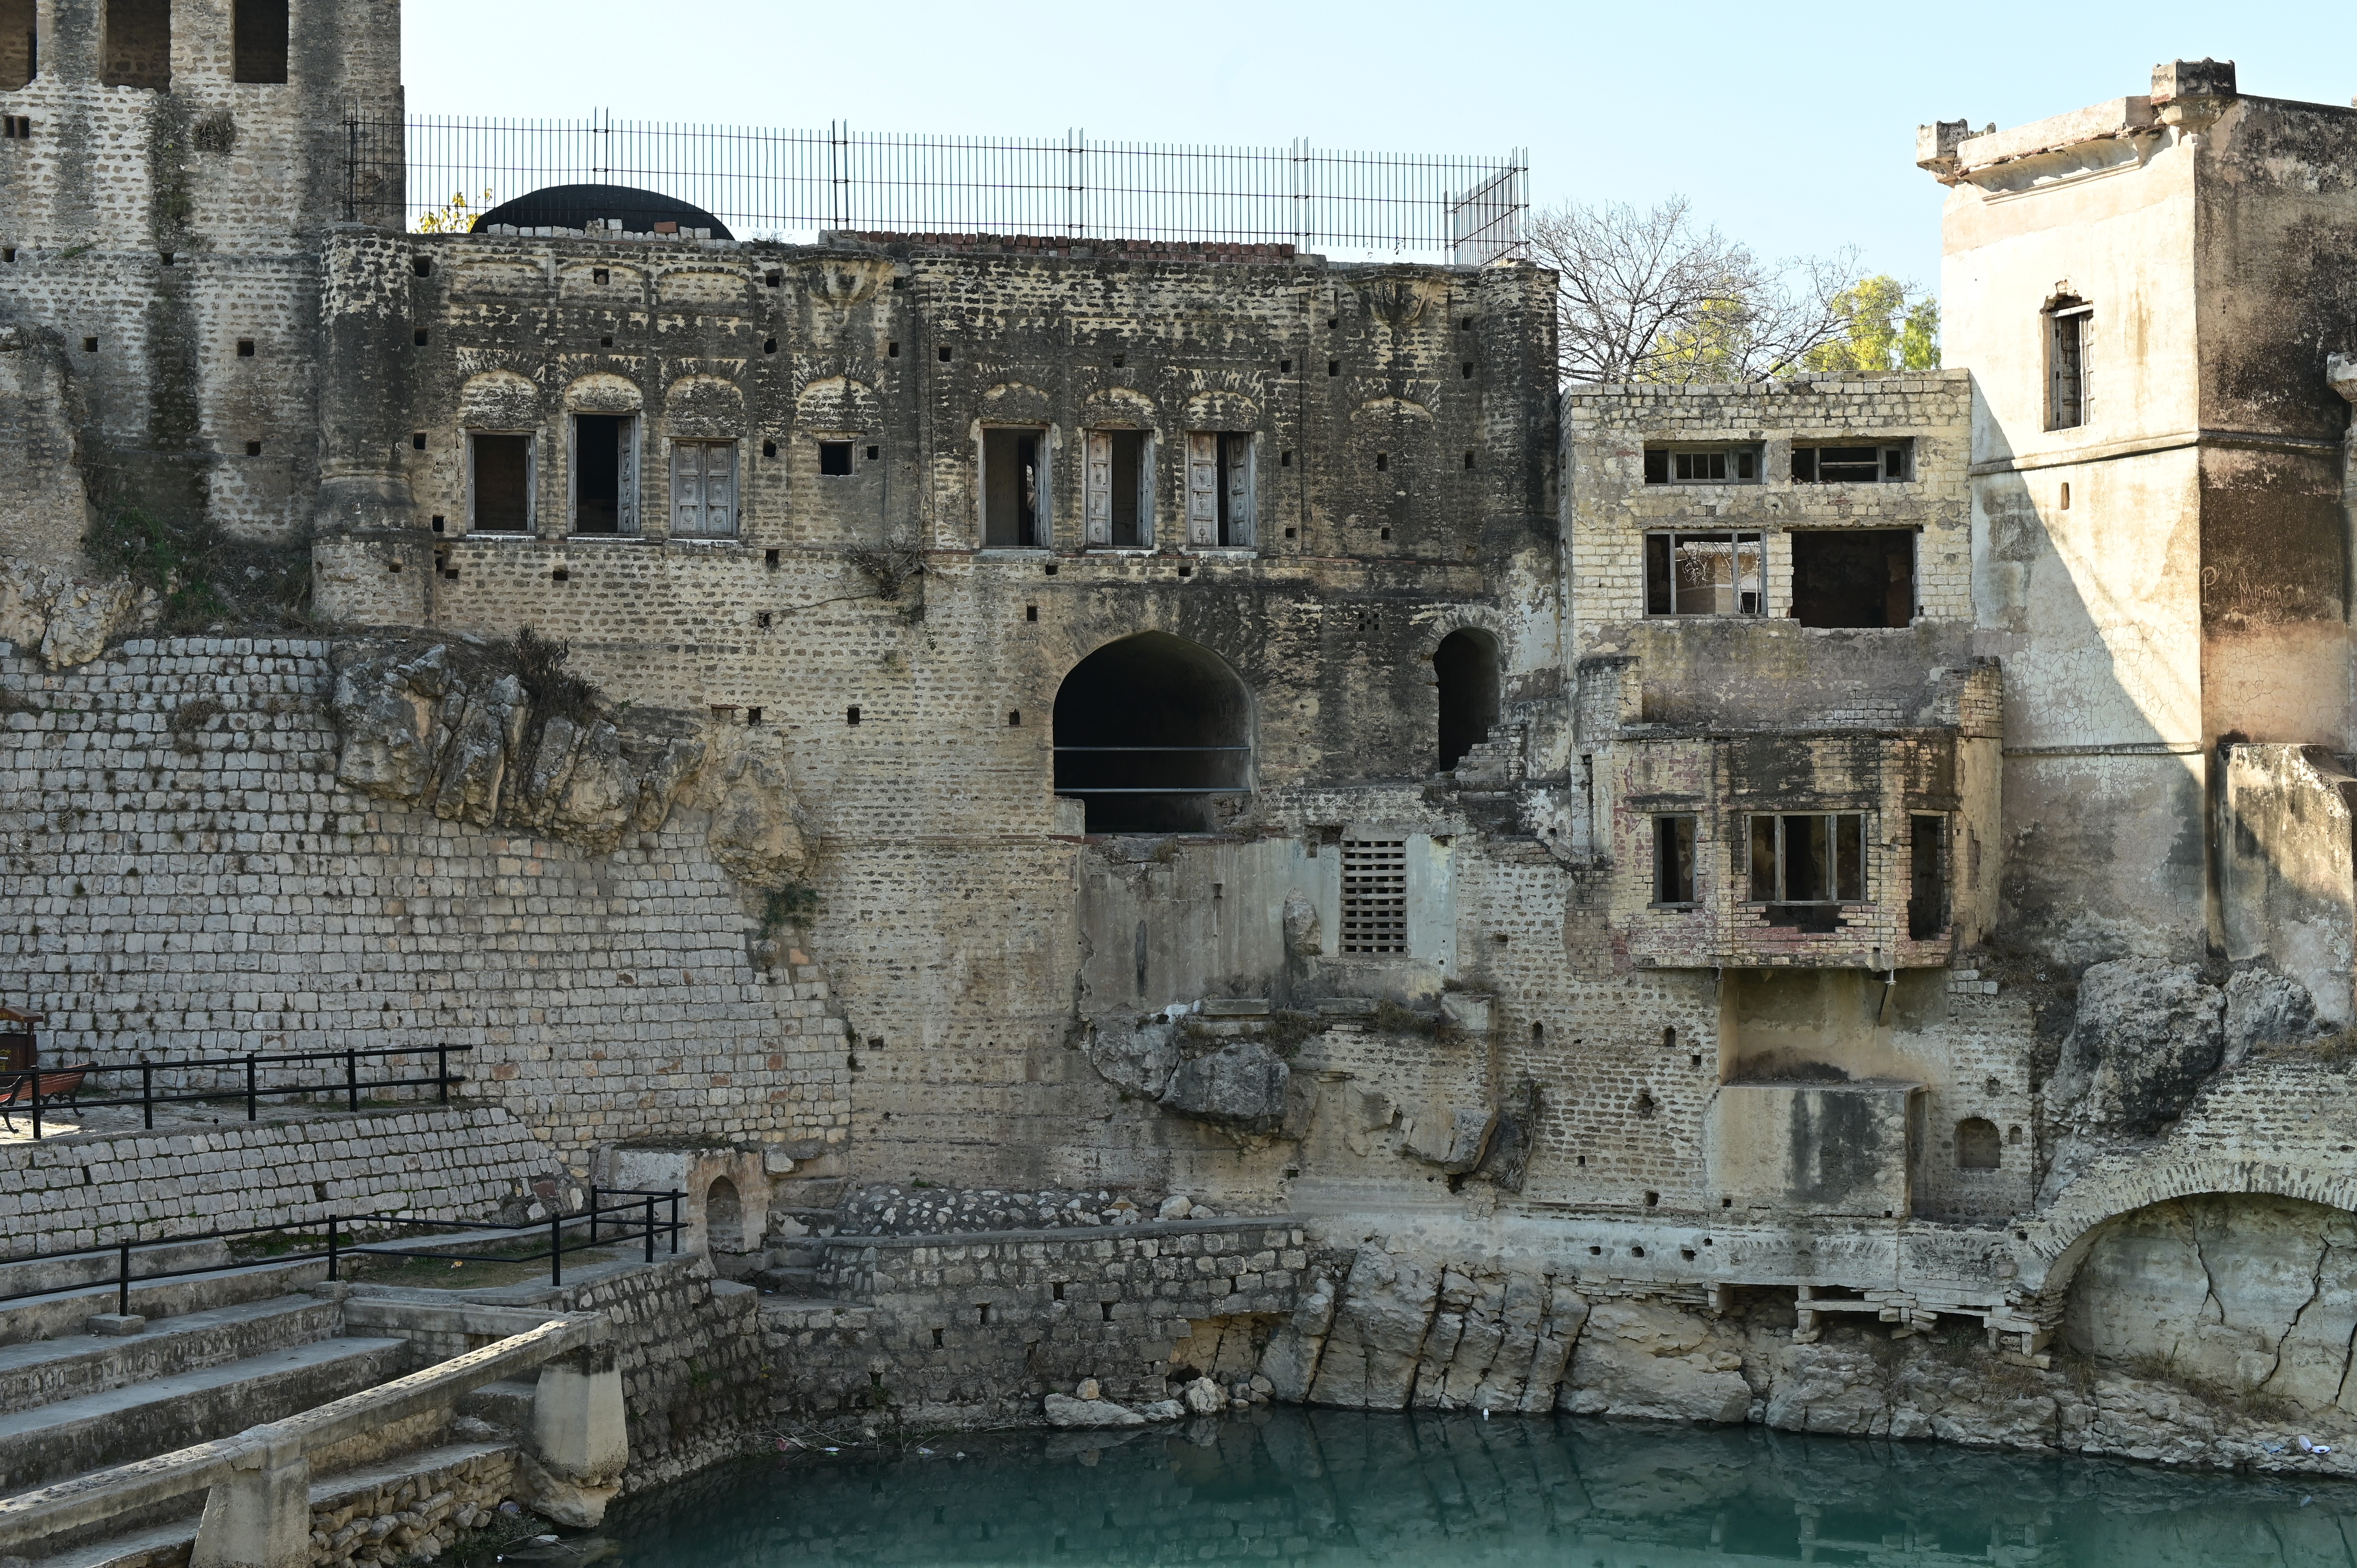 The Shri Katas Raj Temples, also known as Qila Katas, a complex of several Hindu temples connected to one another by walkways.